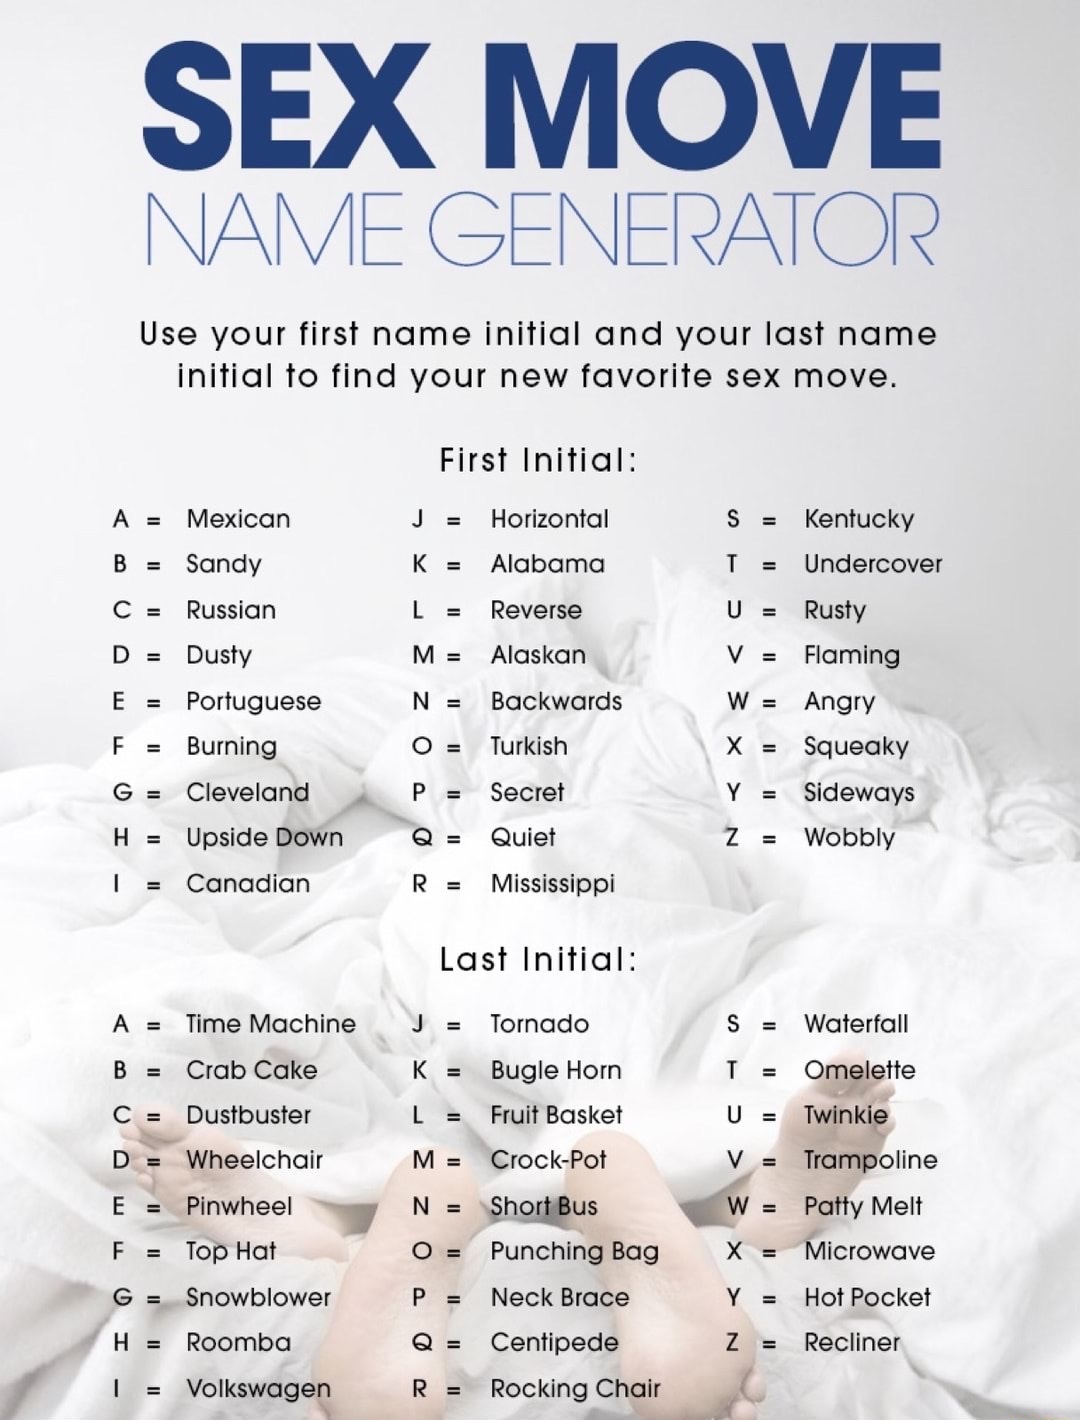 sex move name - Sex Move Name Generator Use your first name initial and your last name initial to find your new favorite sex move. First Initial J Horizontal K Alabama L Reverse A Mexican B Sandy C Russian D Dusty E Portuguese F Burning G Cleveland H Upsi